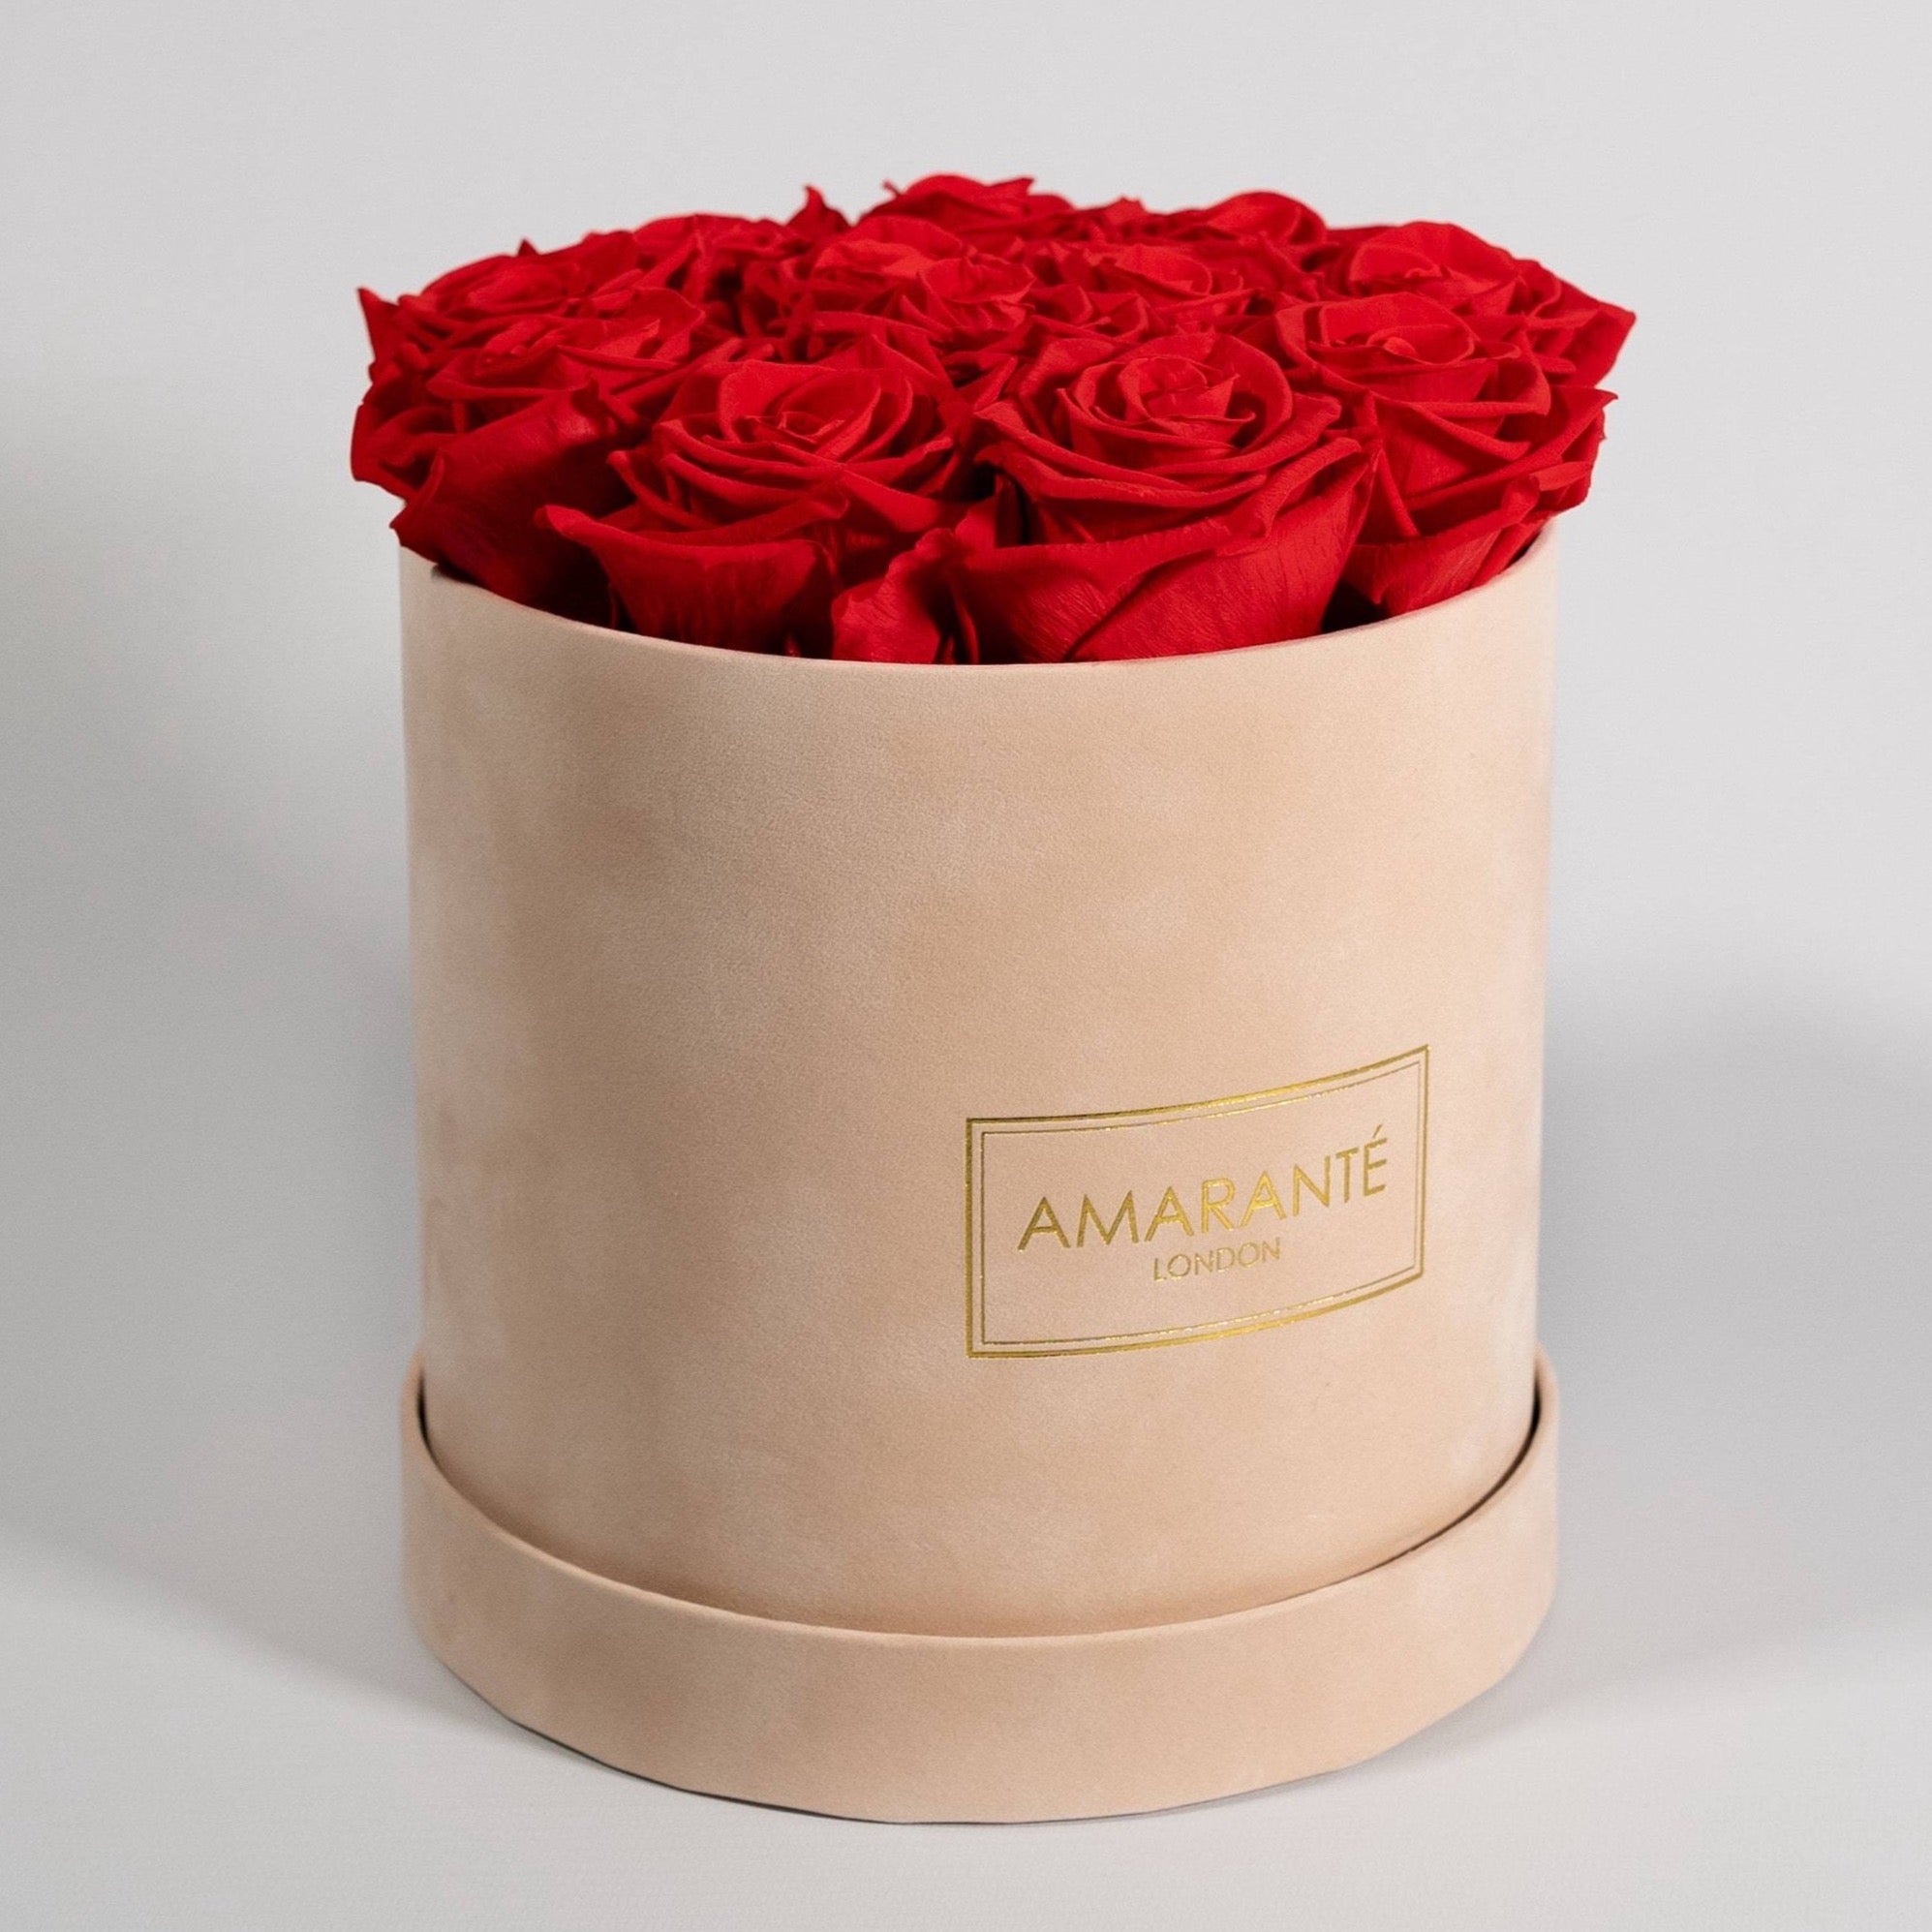 Majestic red roses in a blushing beige box. 